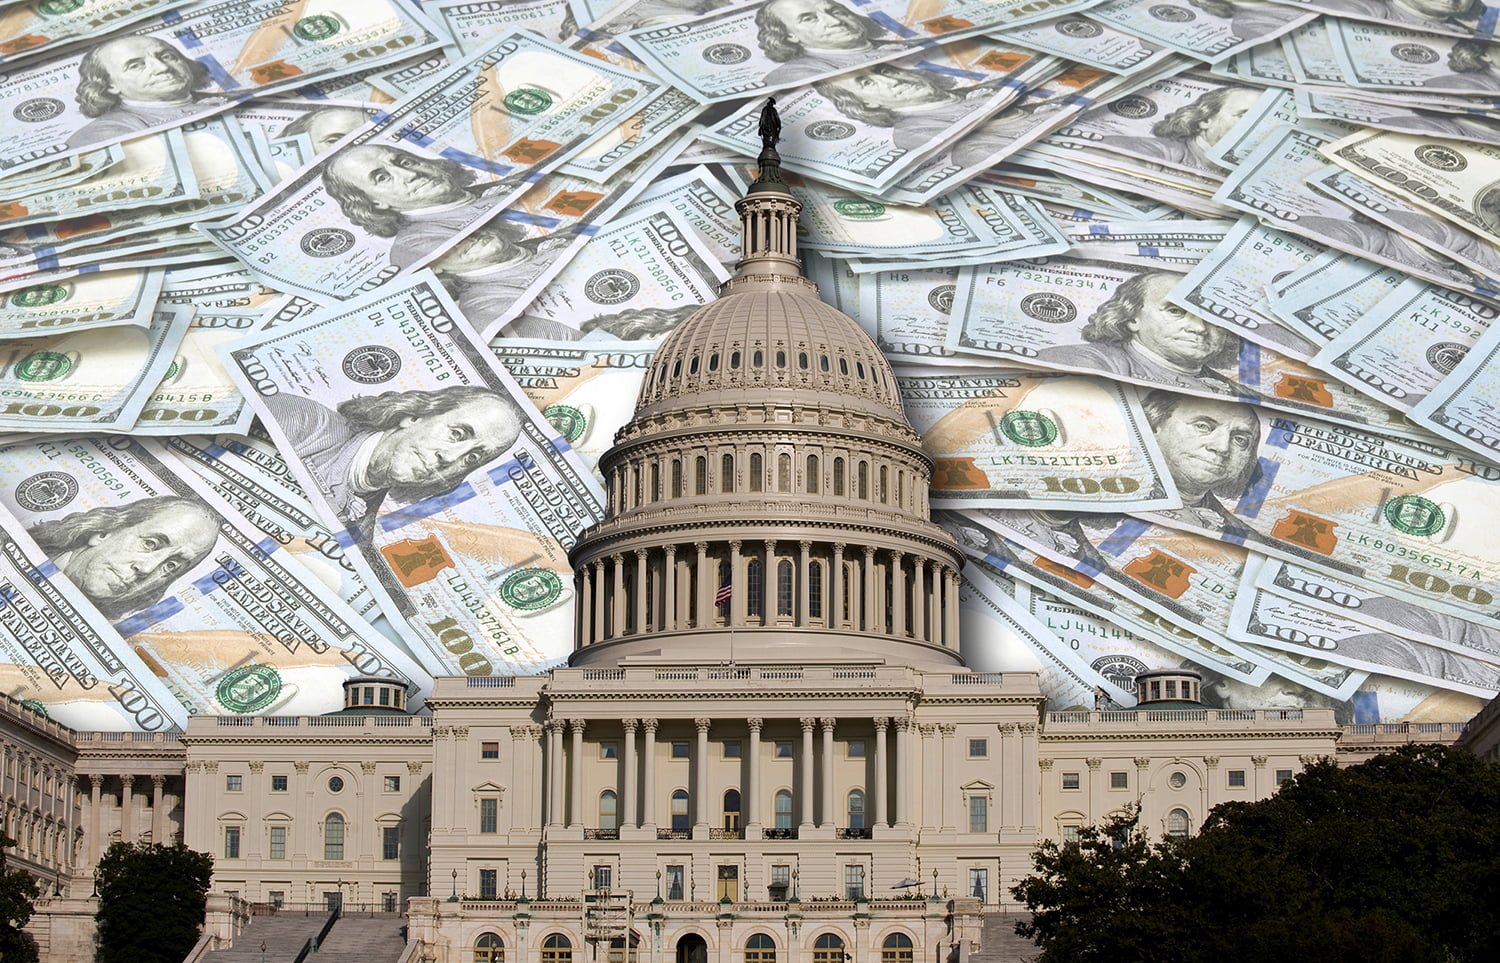 Photo of the US Capitol building with cash in teh background